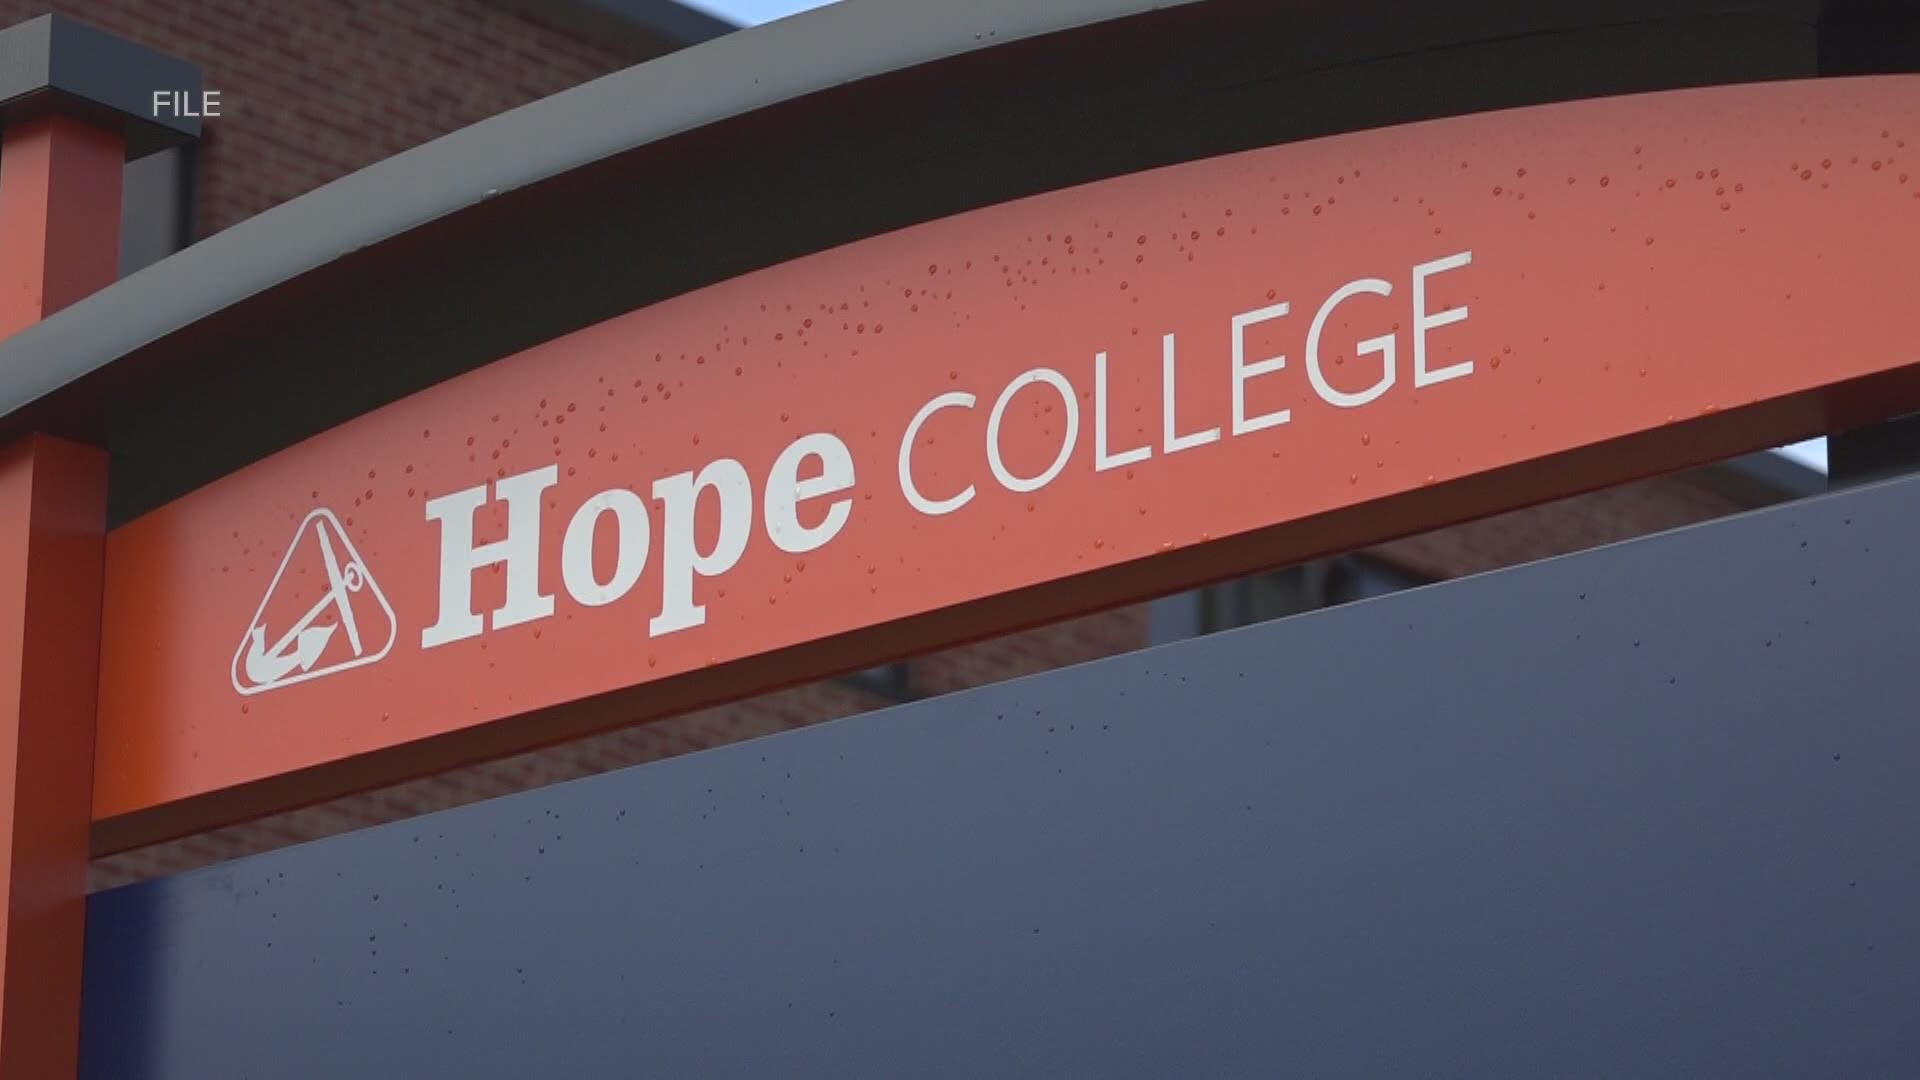 Hope College confirmed with 13 ON YOUR SIDE that some students have tested positive for COVID-19.